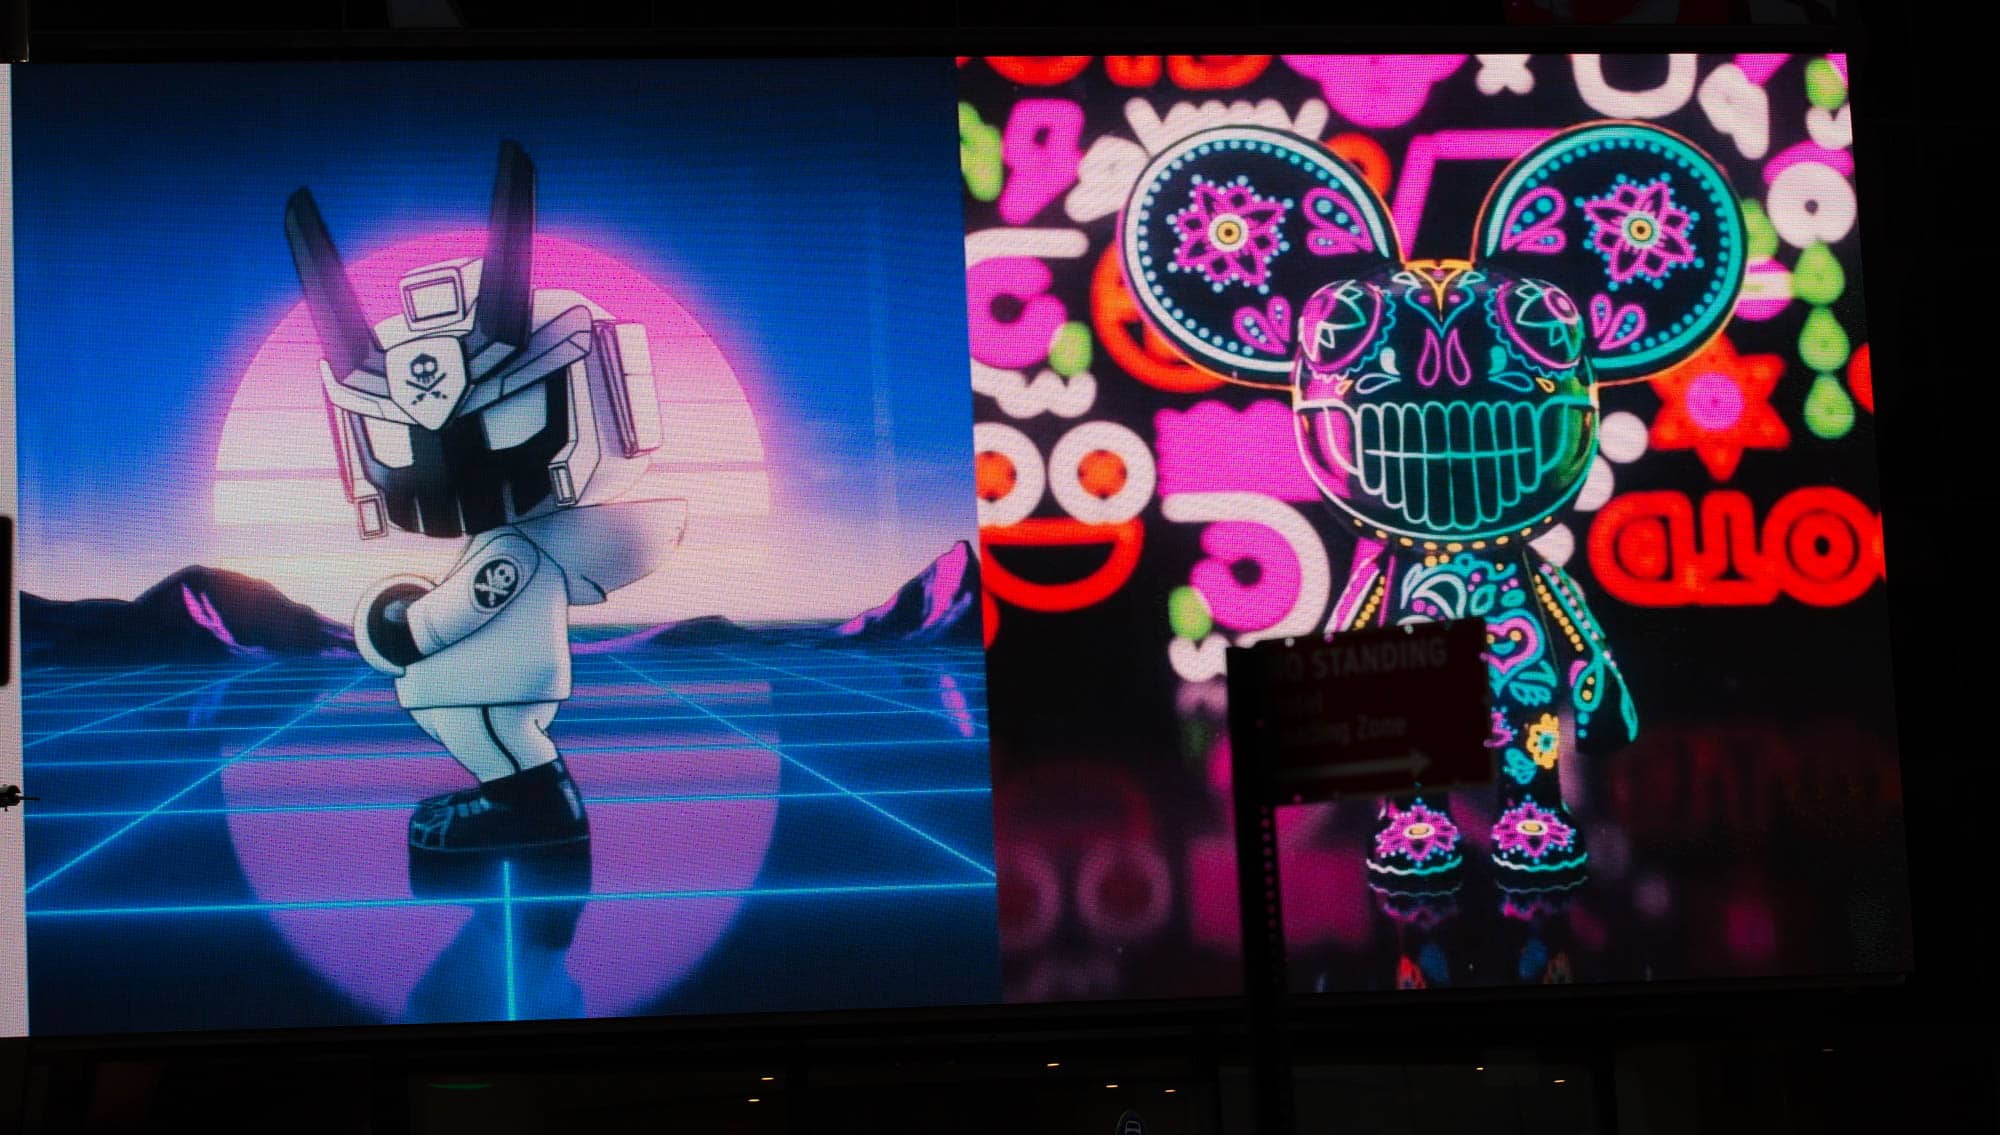 Times Square billboard & animated NFT characters